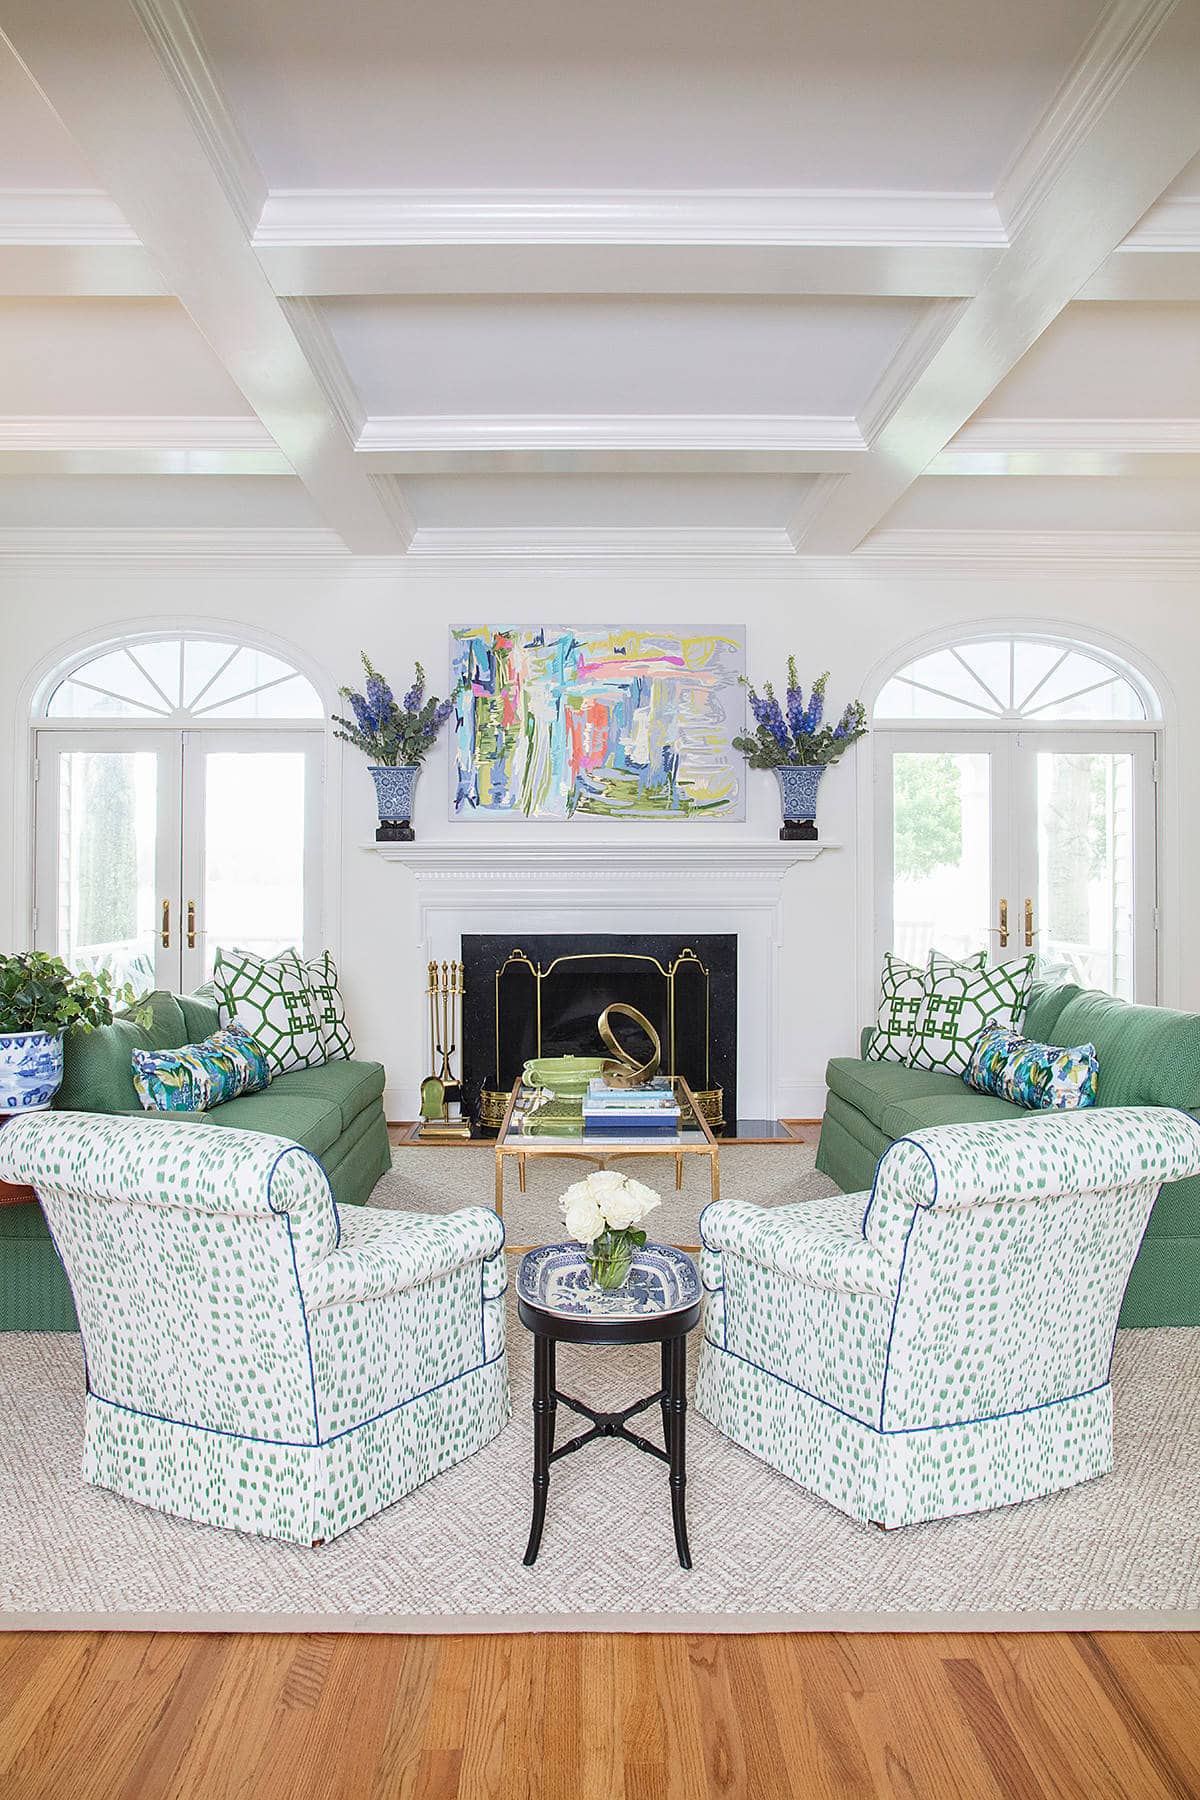 Home tour: Classic living room, coffered ceilings, cozy green couches and armchairs.